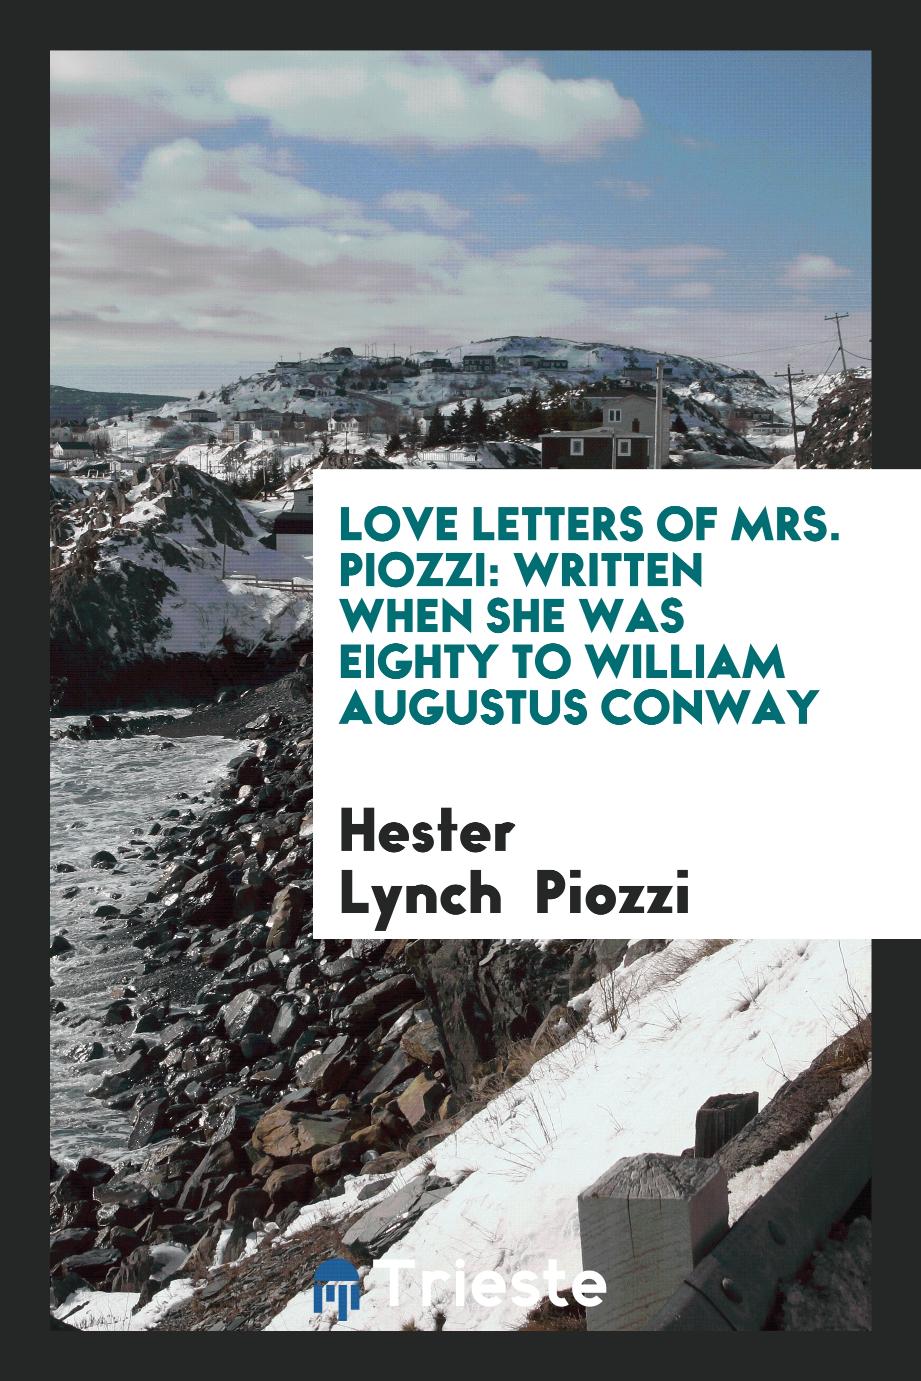 Love letters of Mrs. Piozzi: written when she was eighty to William Augustus Conway